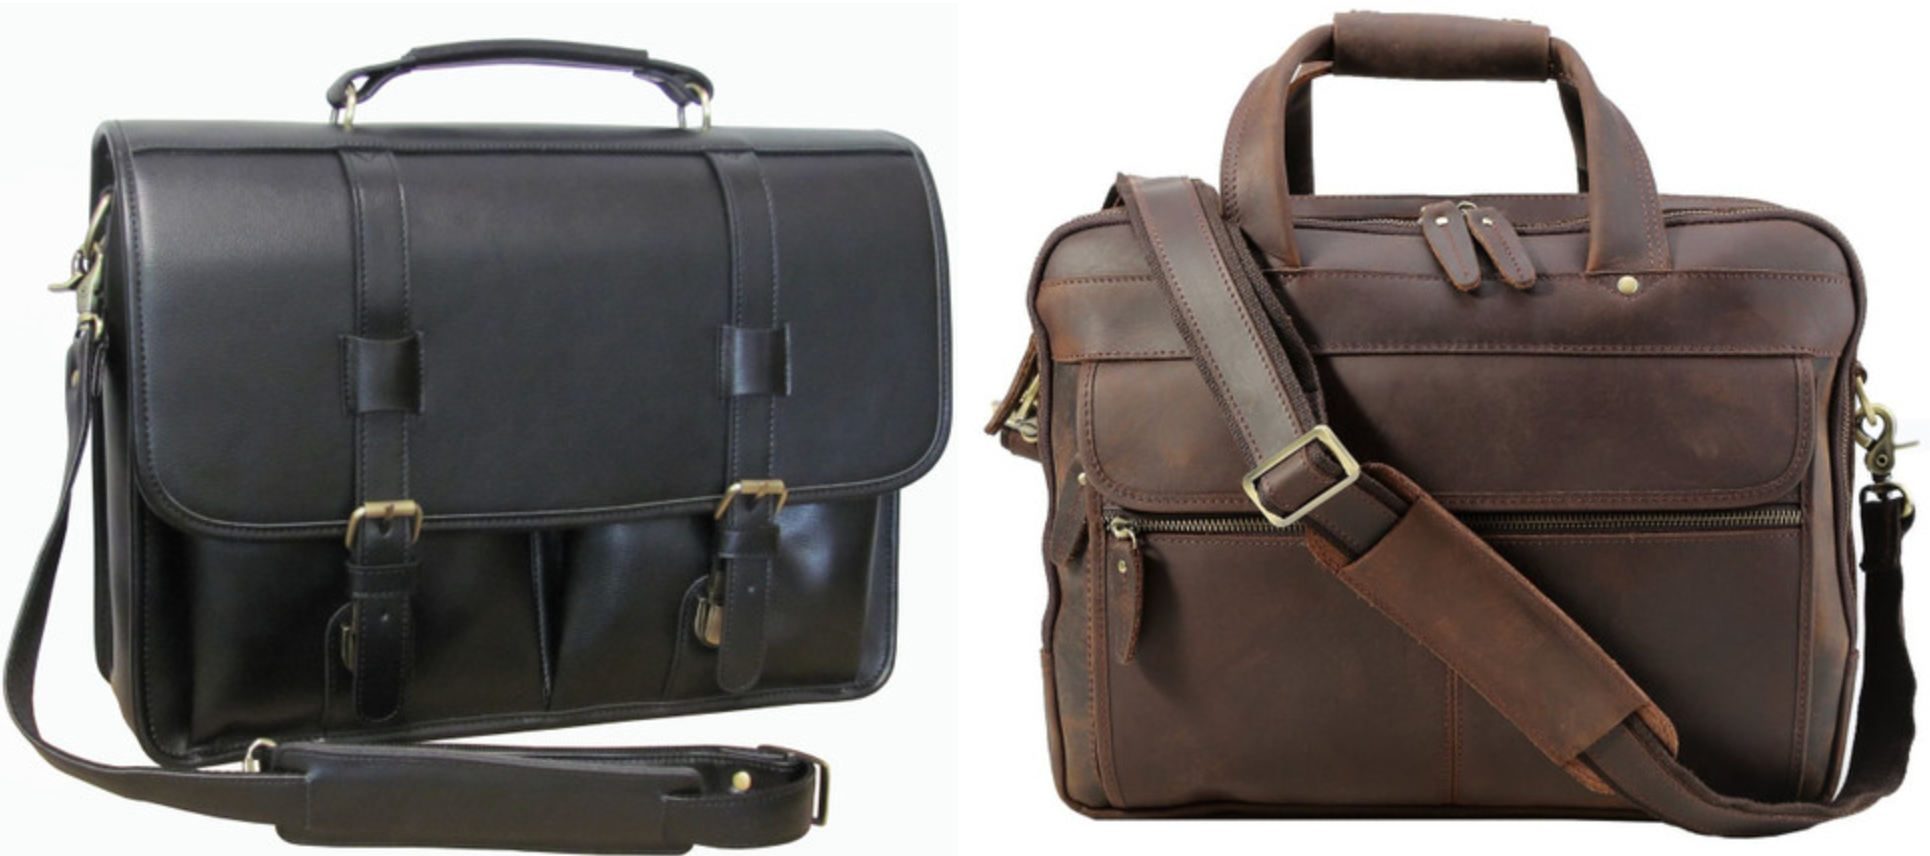 Flap Over vs. Zippered Top Briefcases: Choosing the Perfect Companion ...